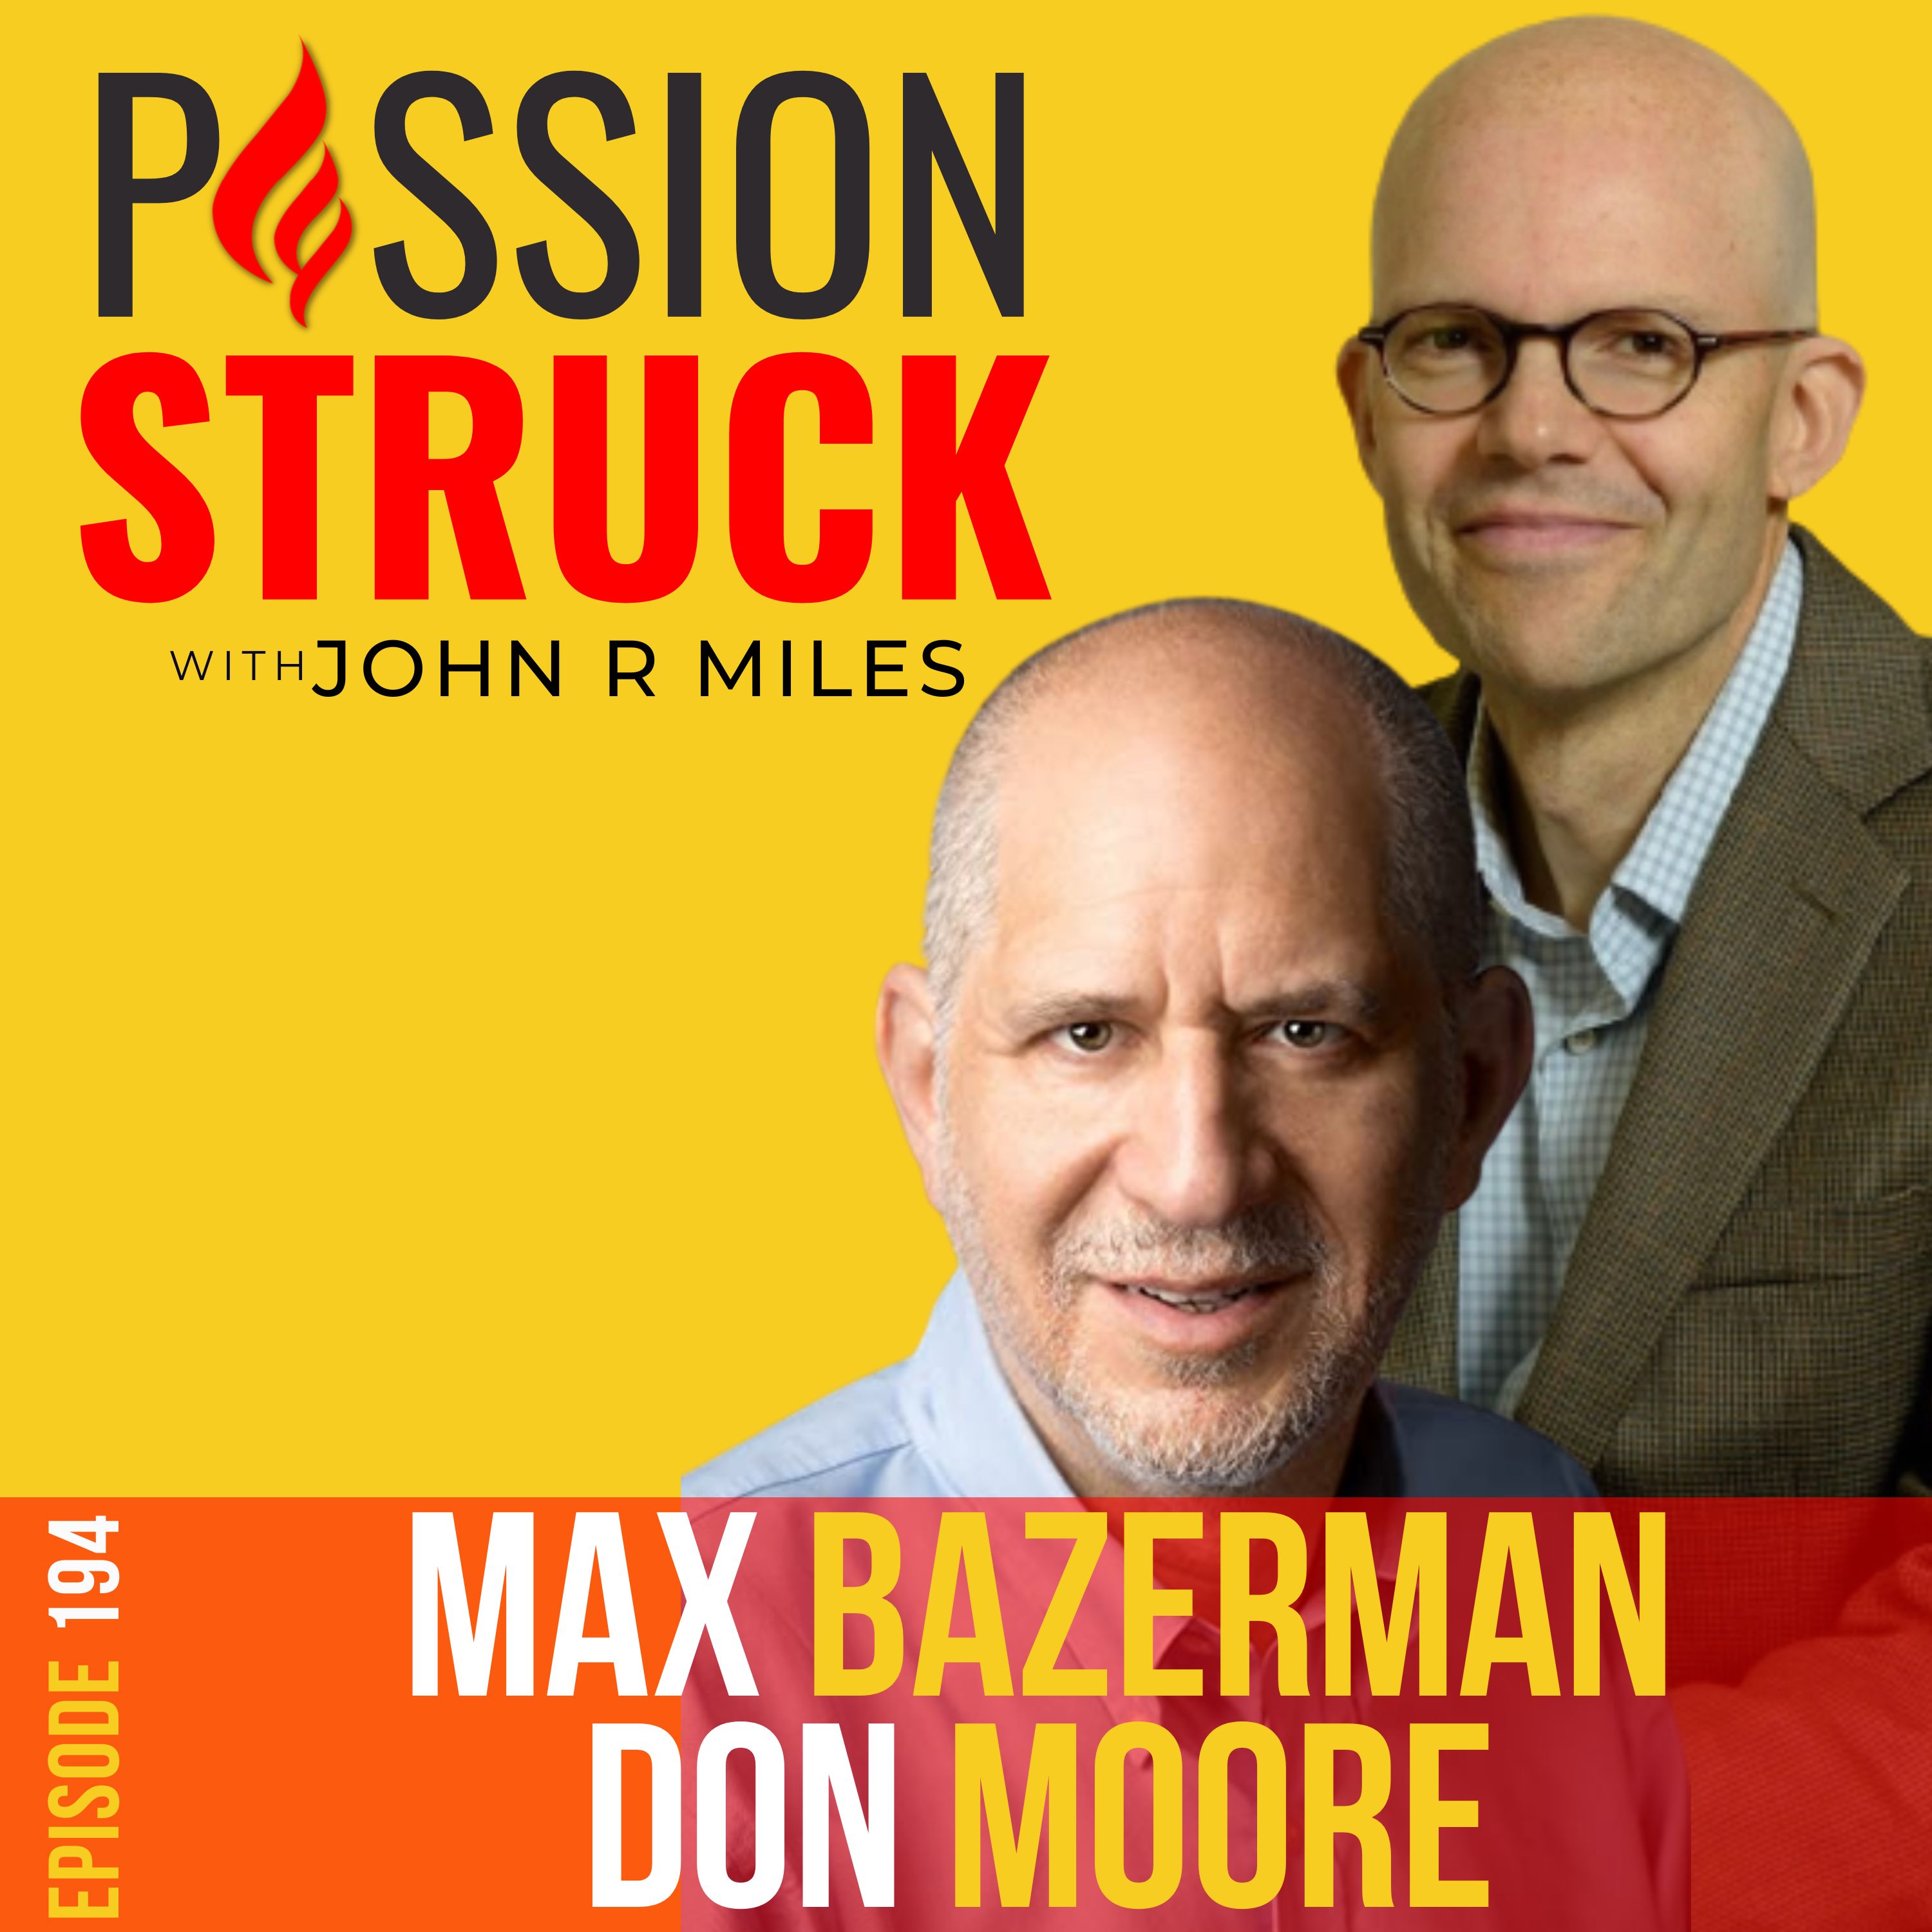 Passion Struck podcast album cover episode 194 with Max Bazerman and Don Moore